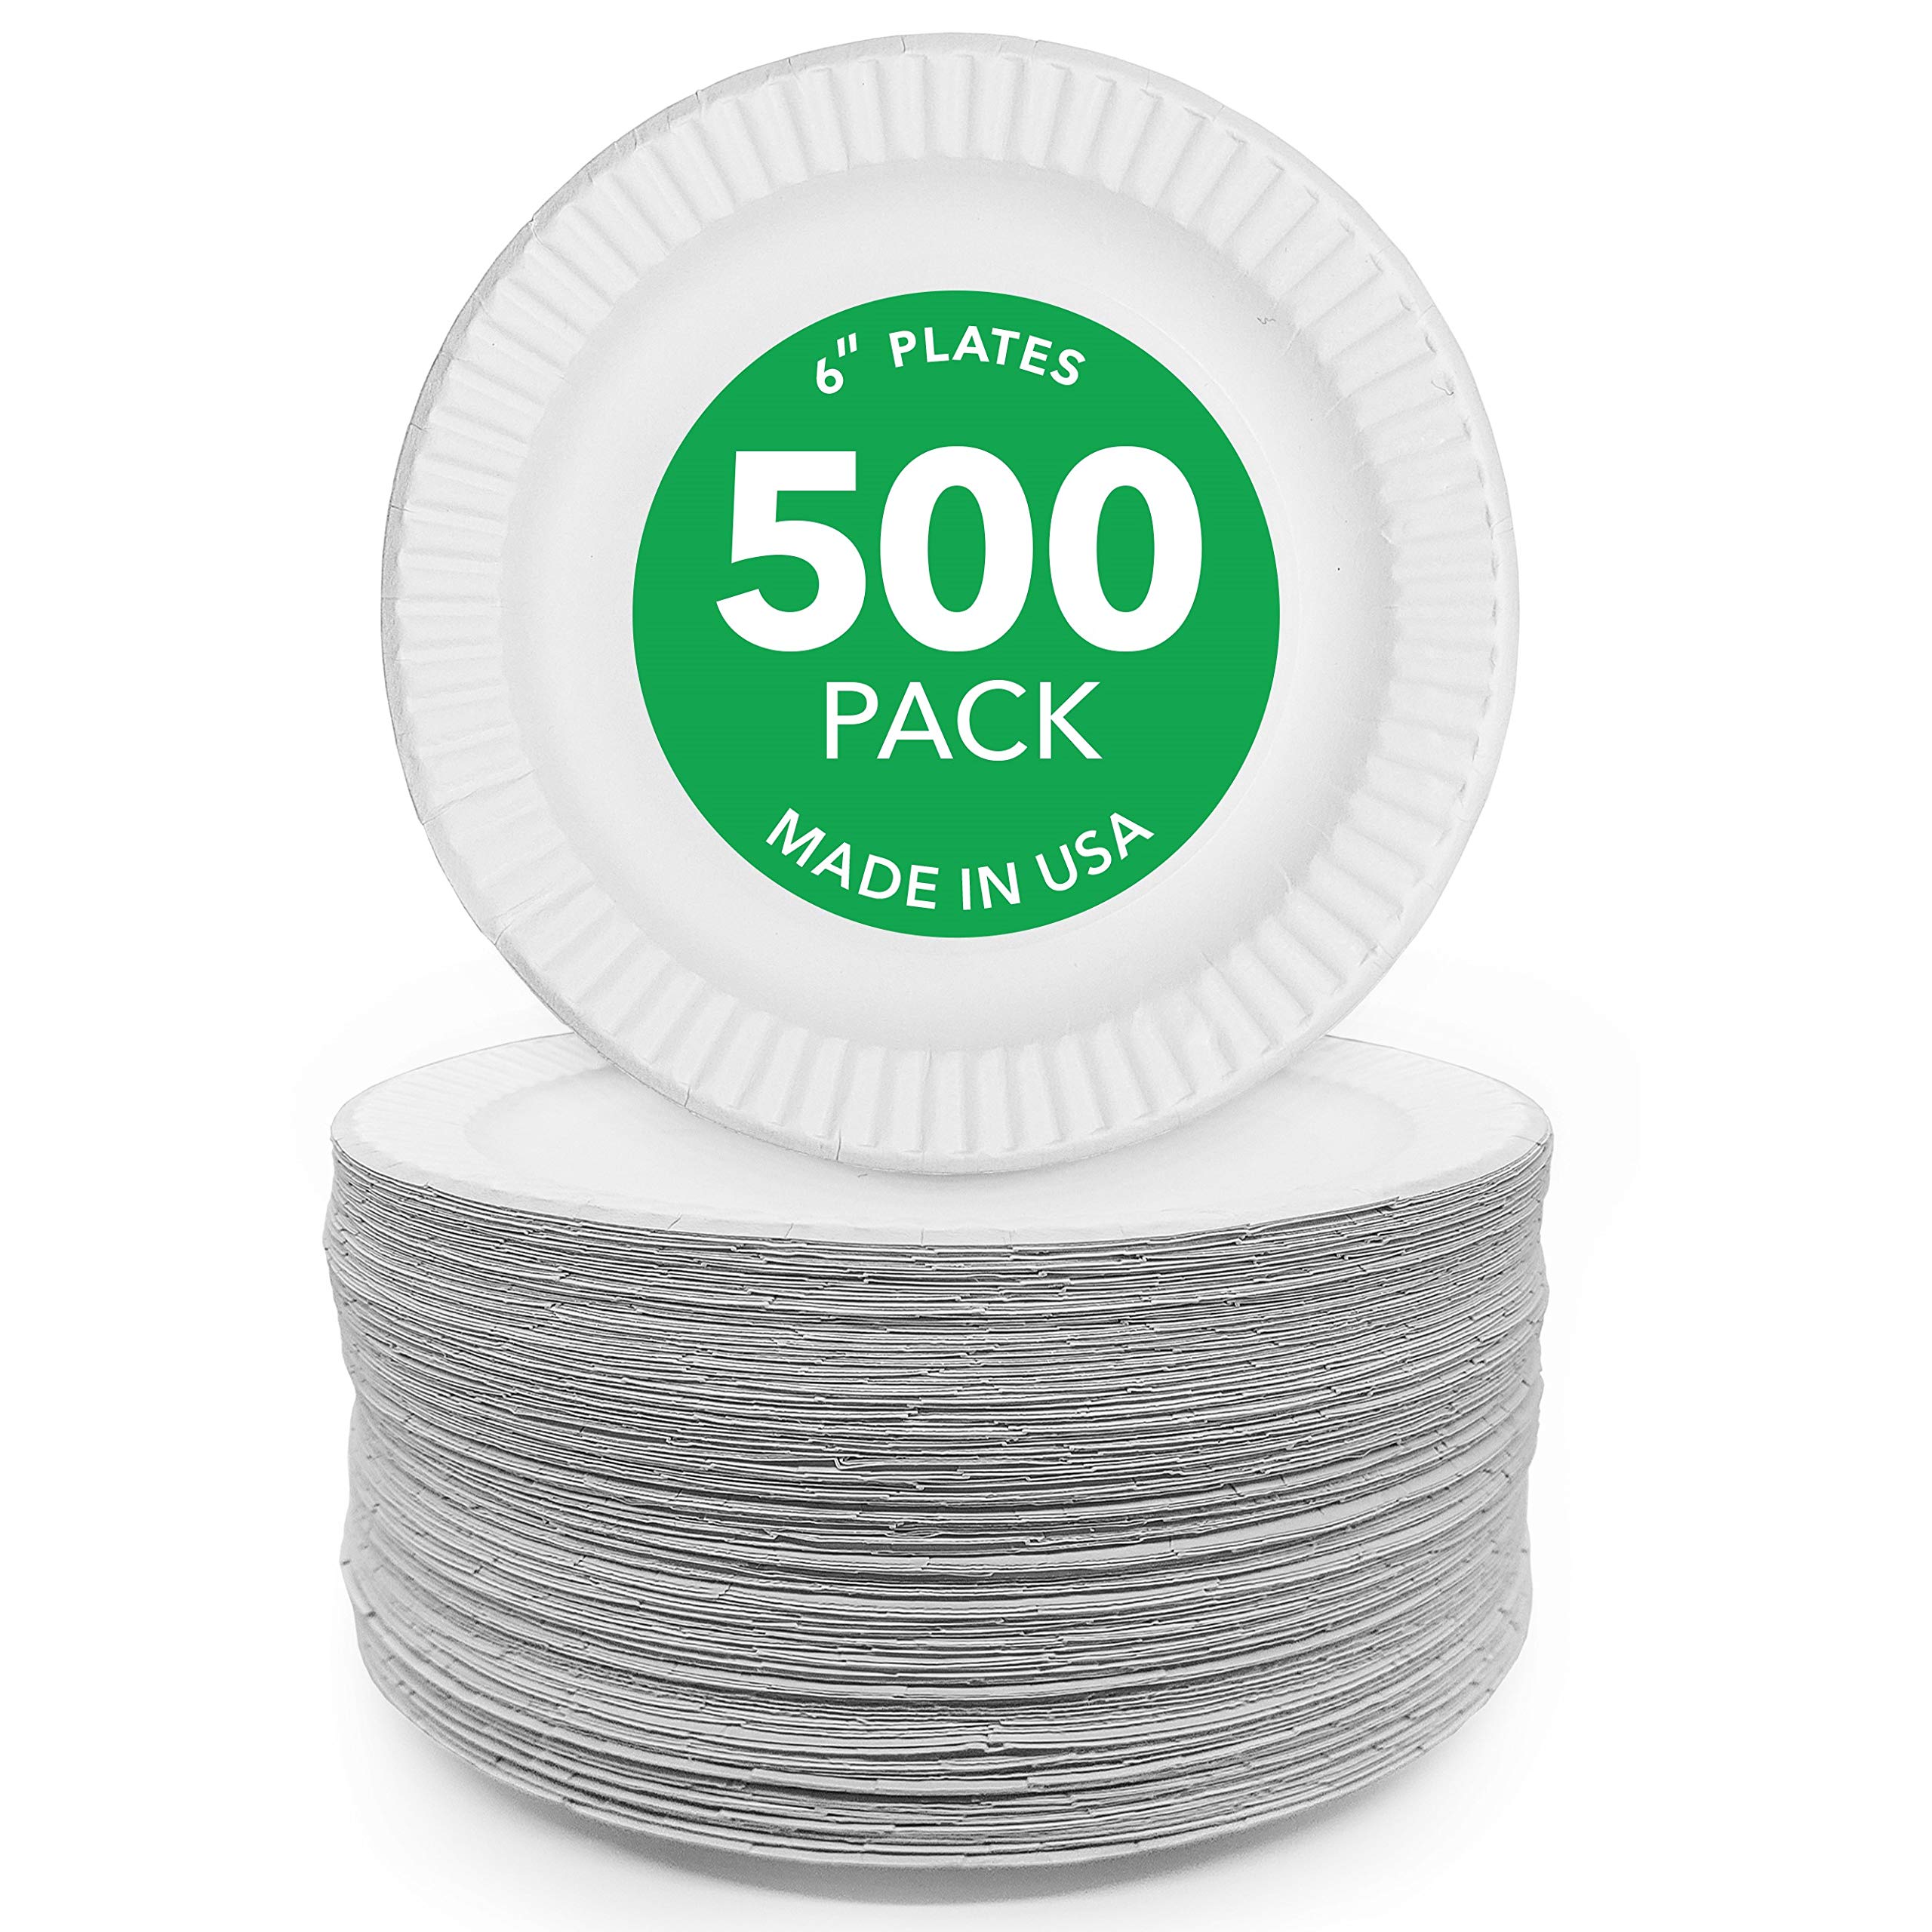 Great Value Uncoated, Microwave Safe, Disposable Paper Plates, 6, White,  100 Count 